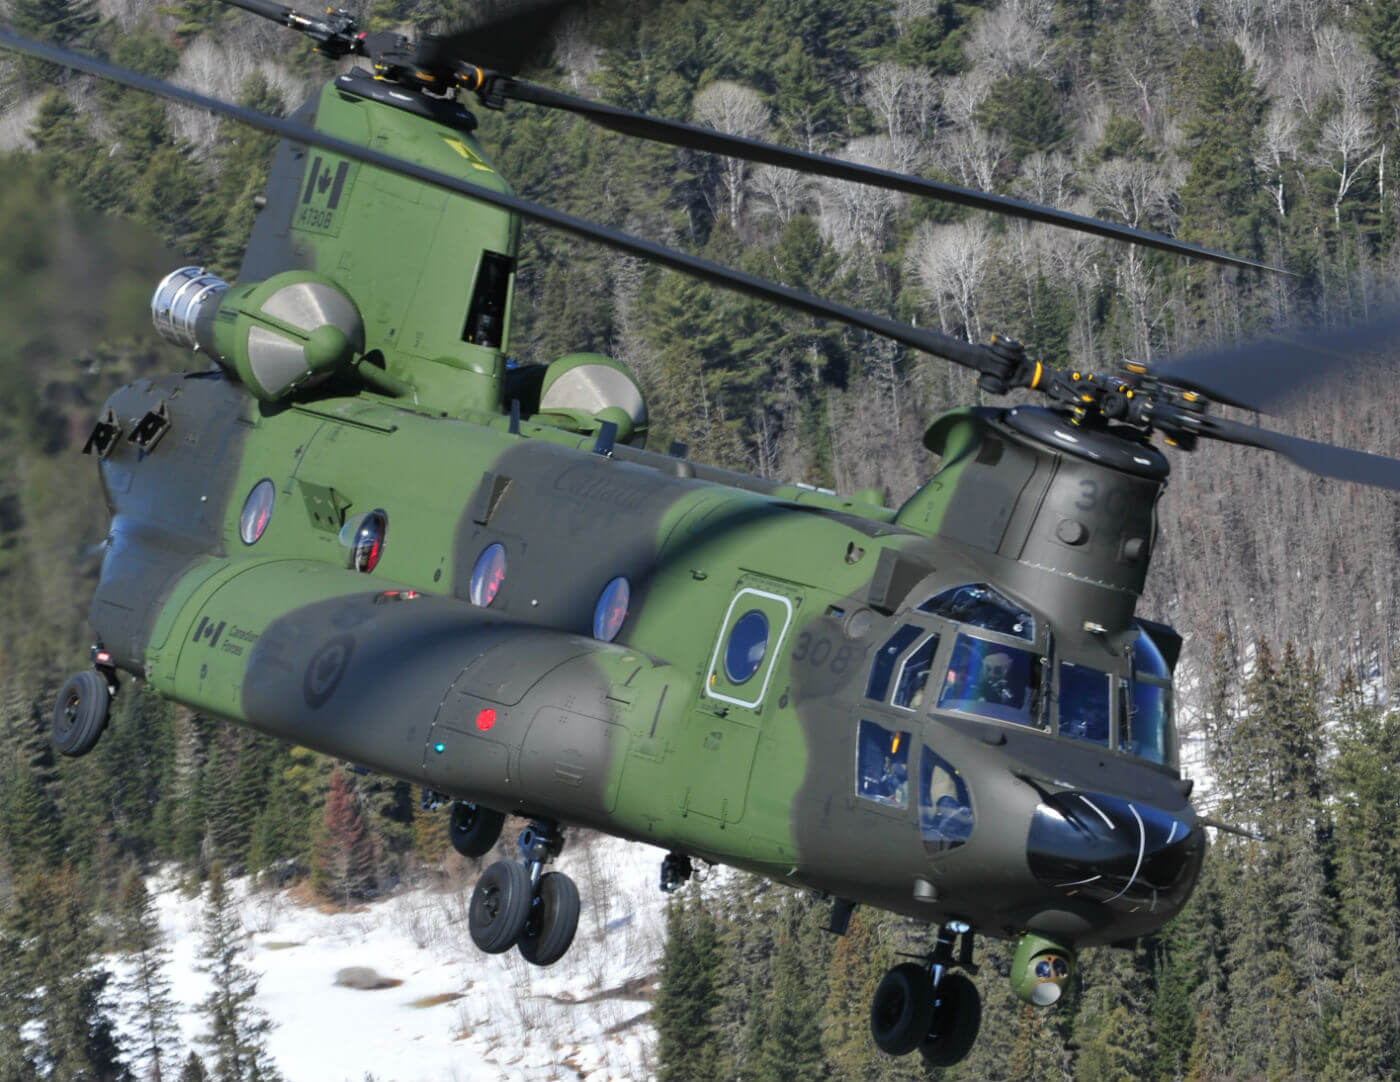 At present, the RCAF does not have an approved project to upgrade the CH-147F Chinook fleet, but it is seeking to improve the weapons system through the normal project approval process to "maintain relevance and compliance." Mike Reyno Photo